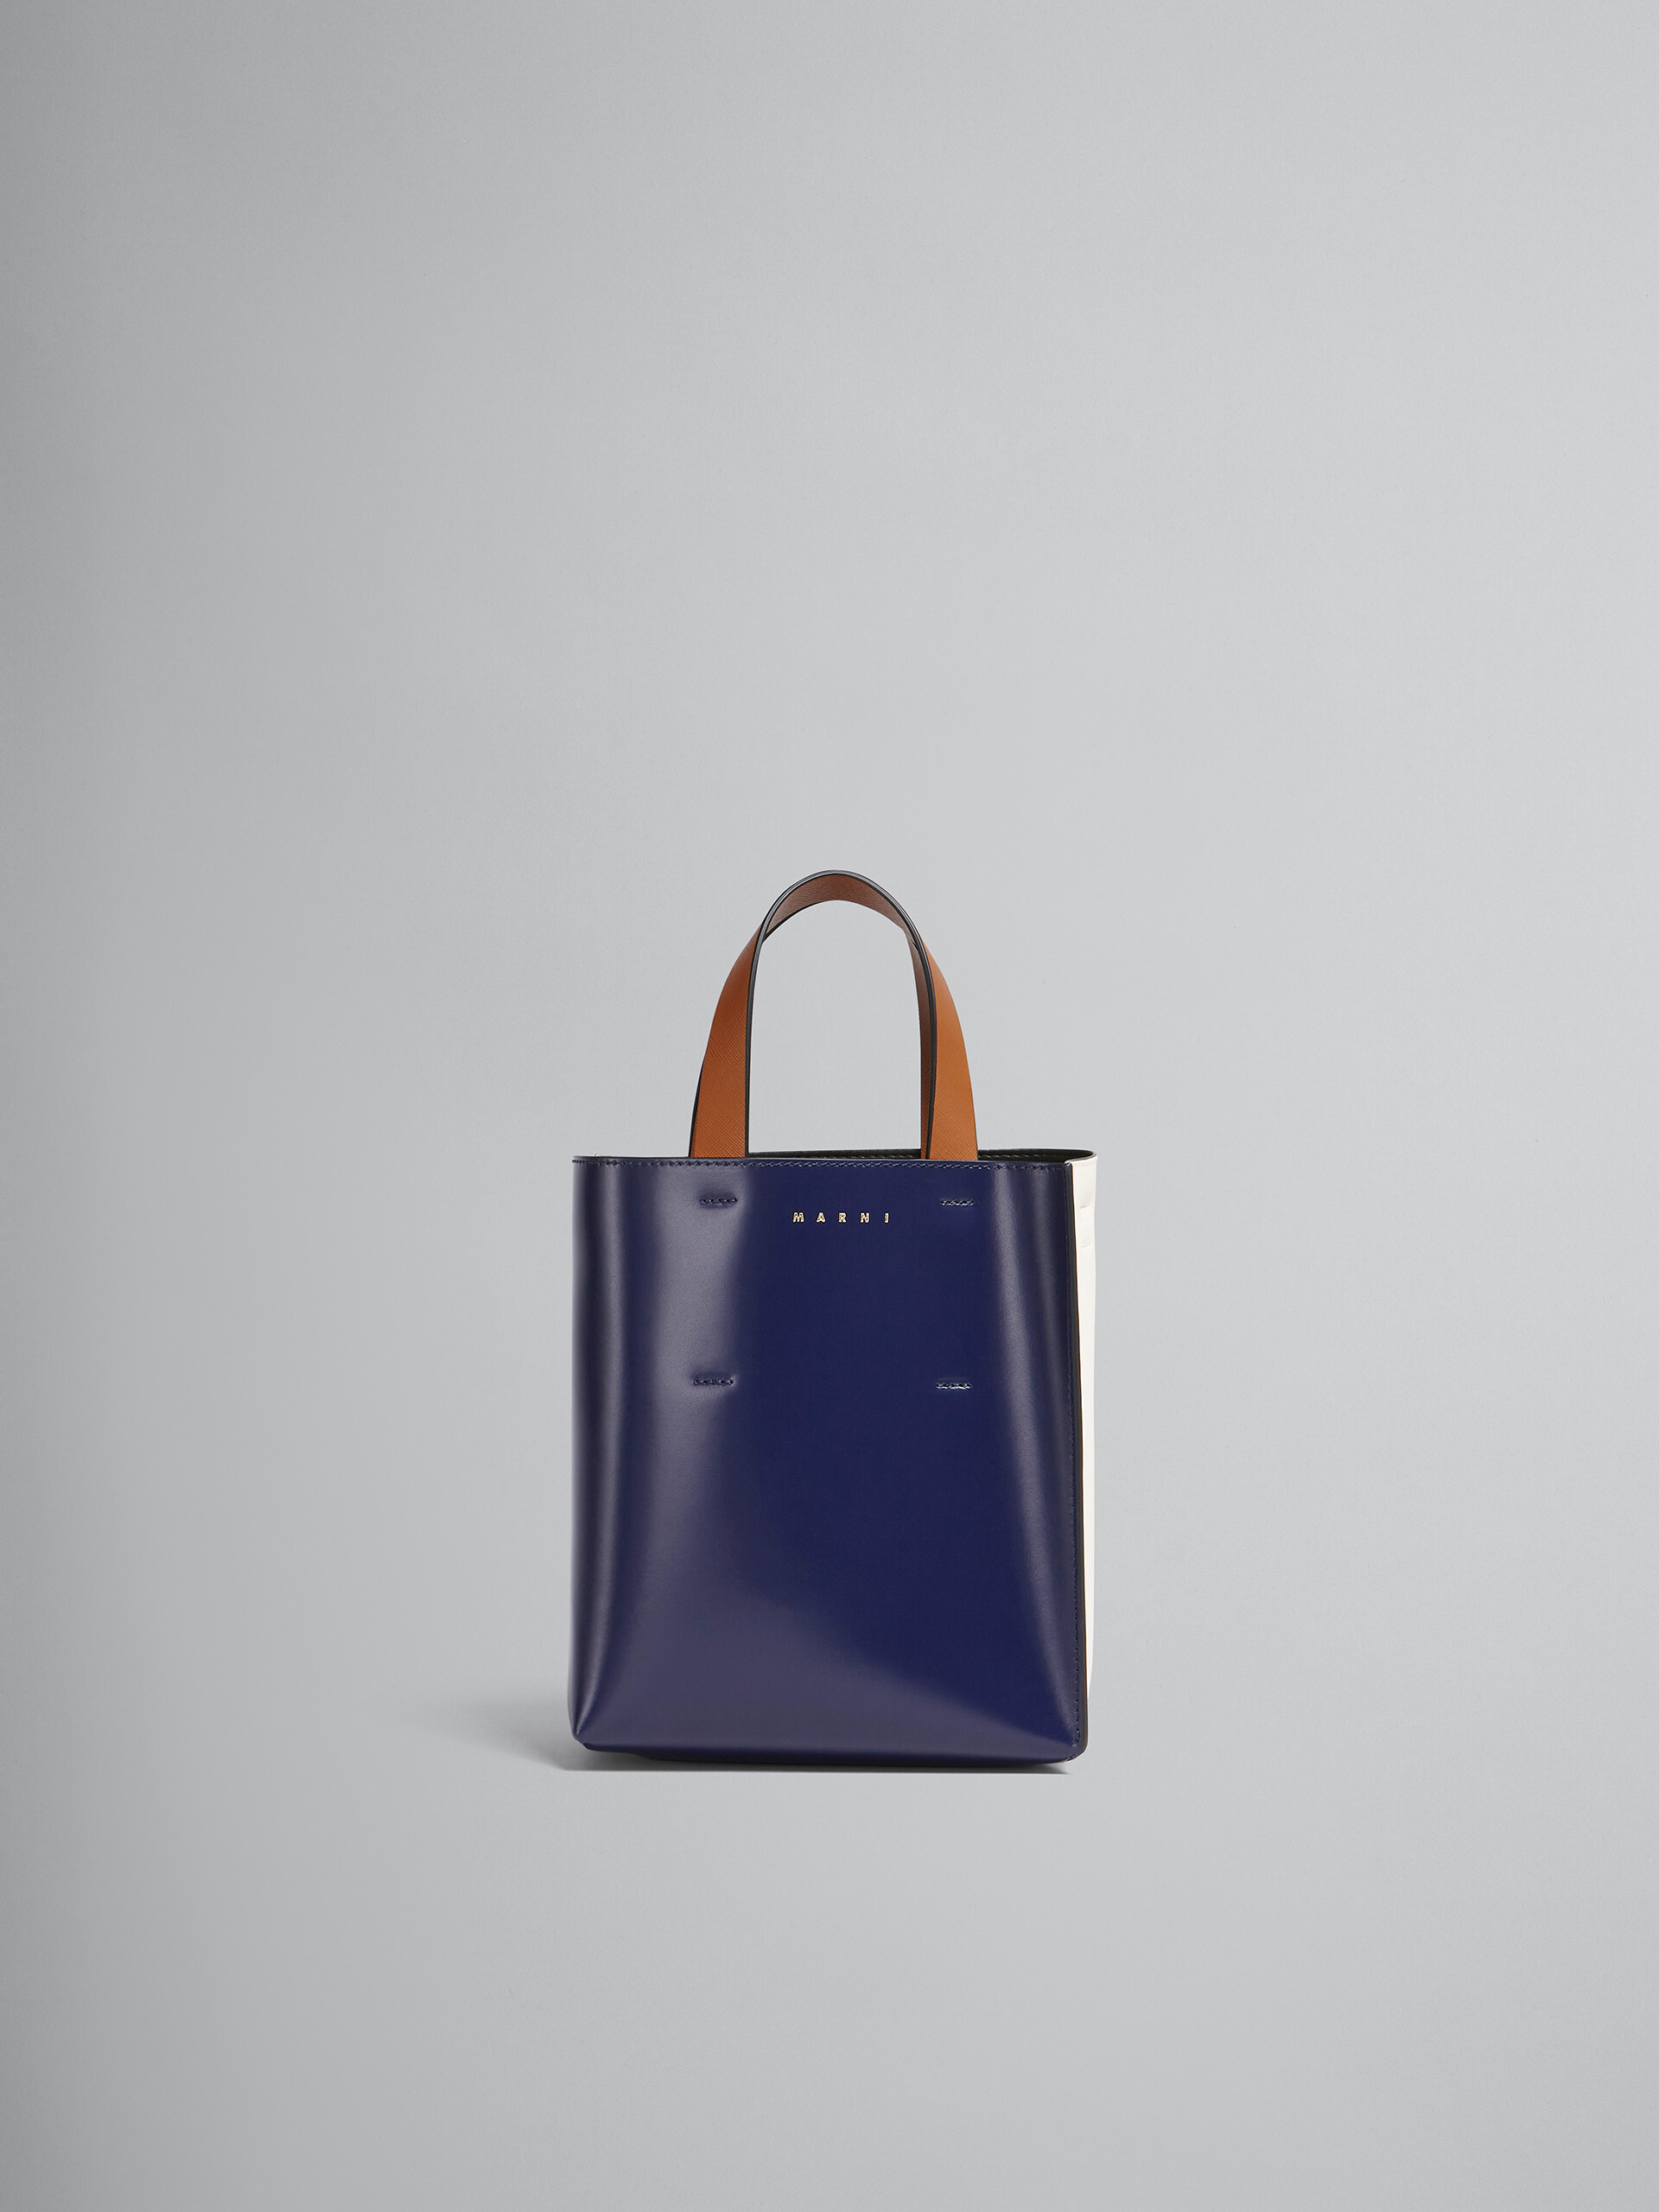 MUSEO mini bag in blue and white leather - Shopping Bags - Image 1